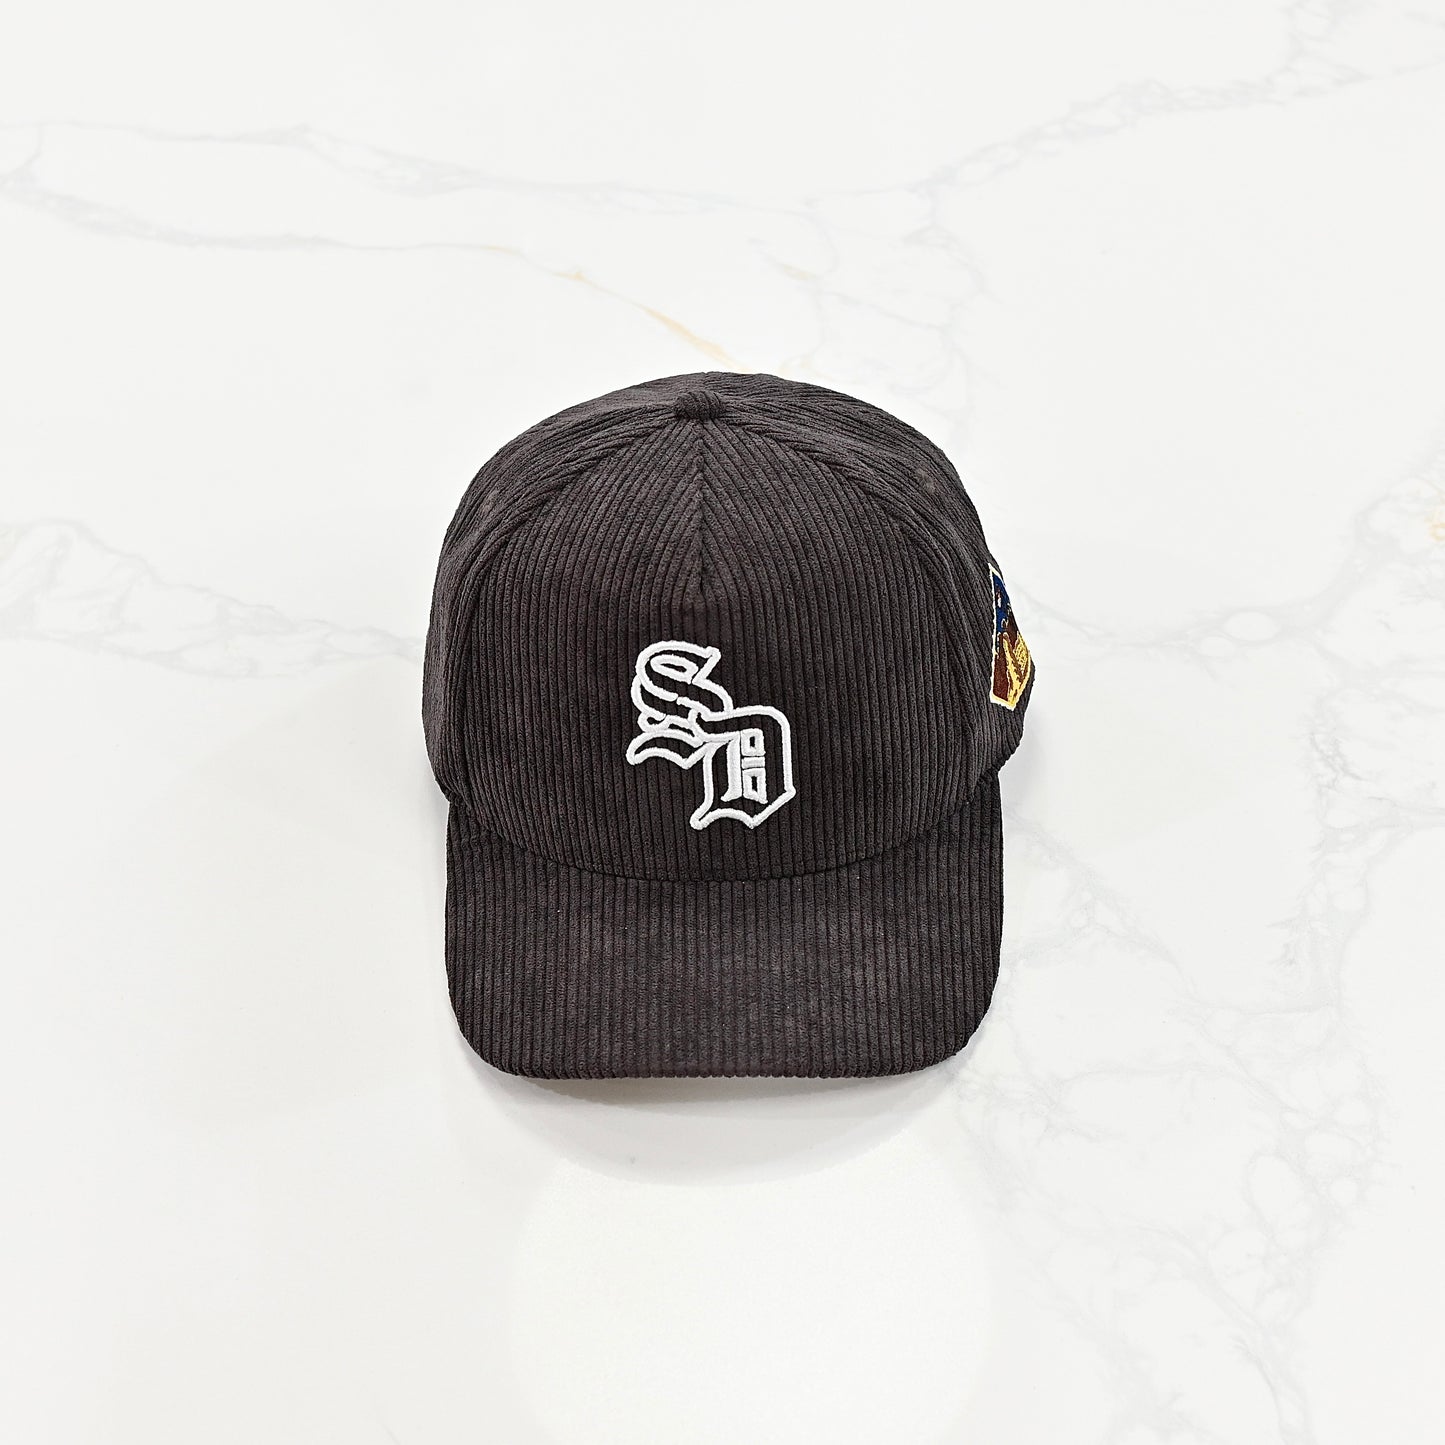 SD Padres Hat